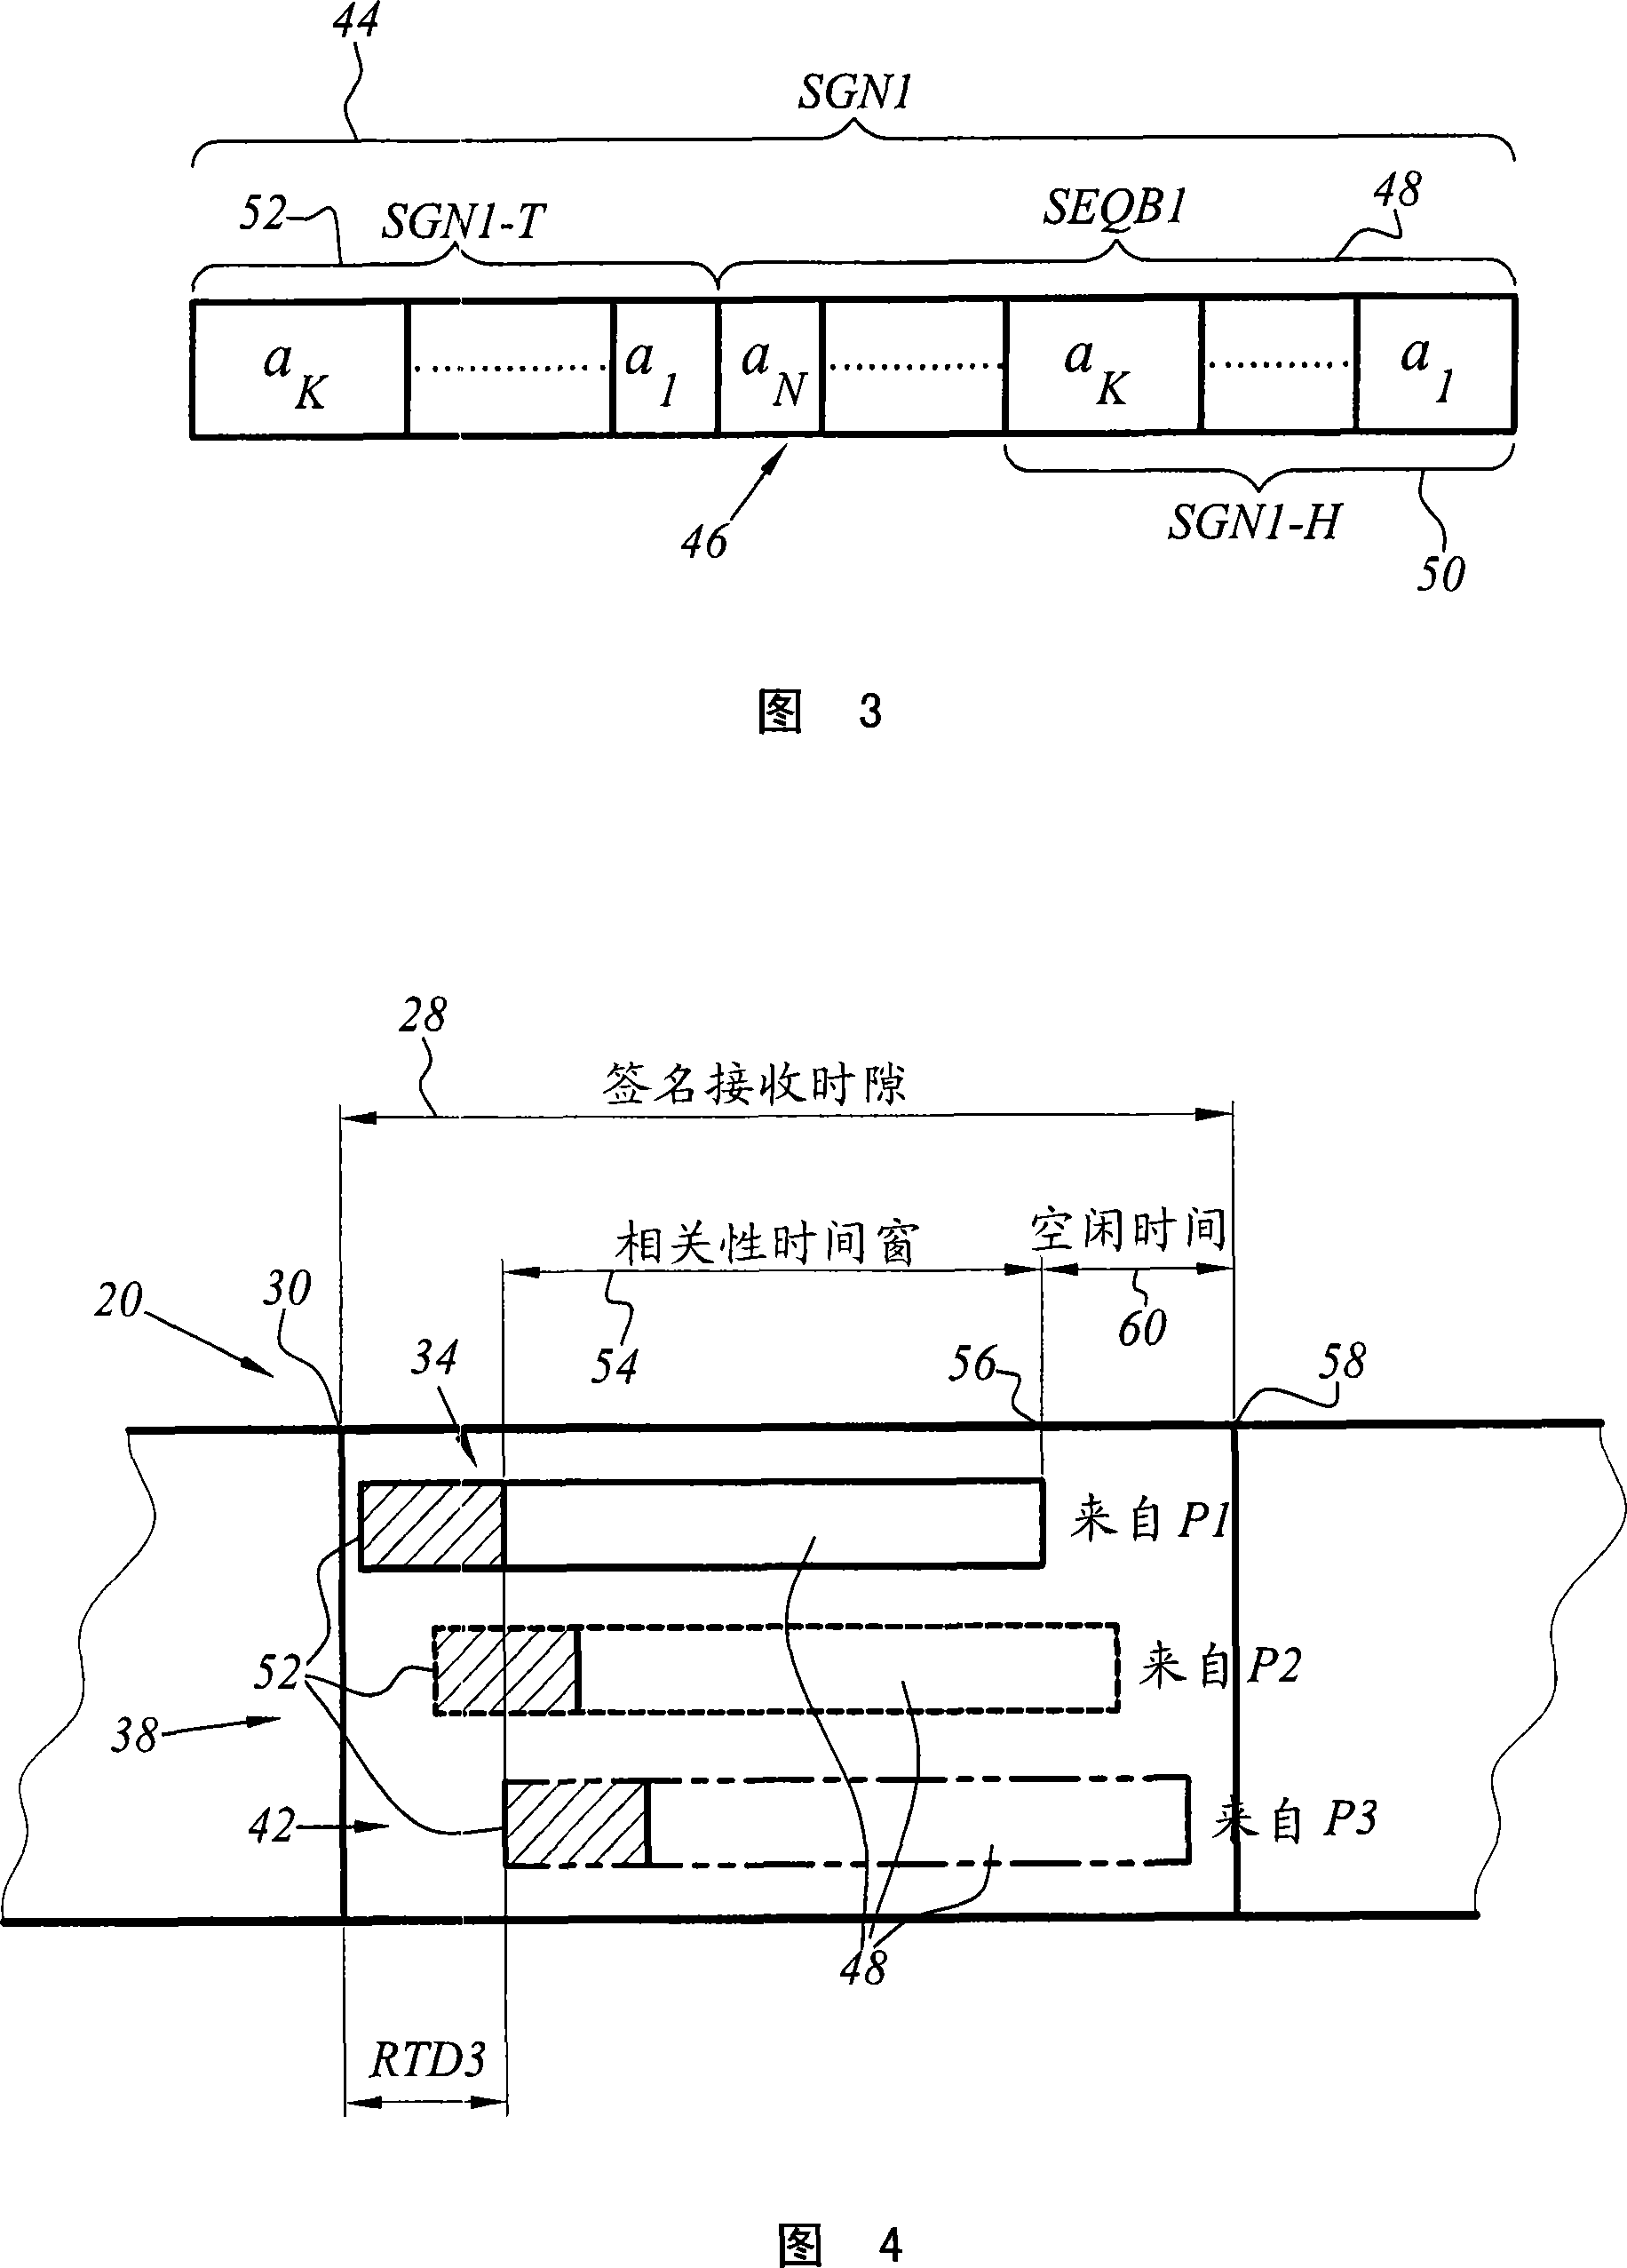 Method to estimate multiple round trip delays attached to cellular terminals